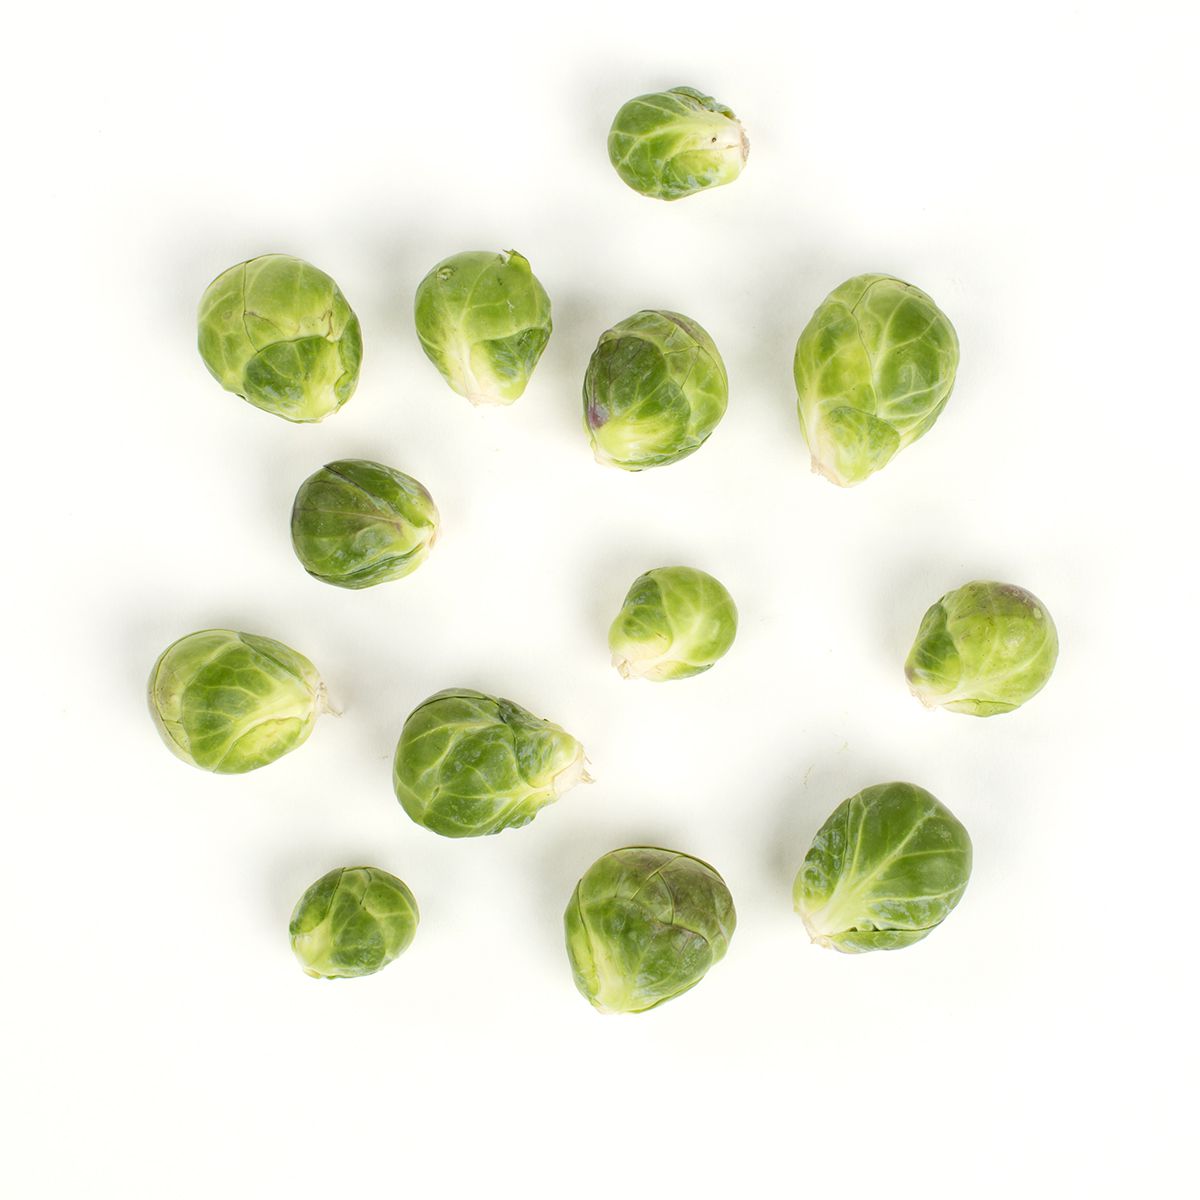 BoxNCase Organic Brussels Sprouts 10 Lb